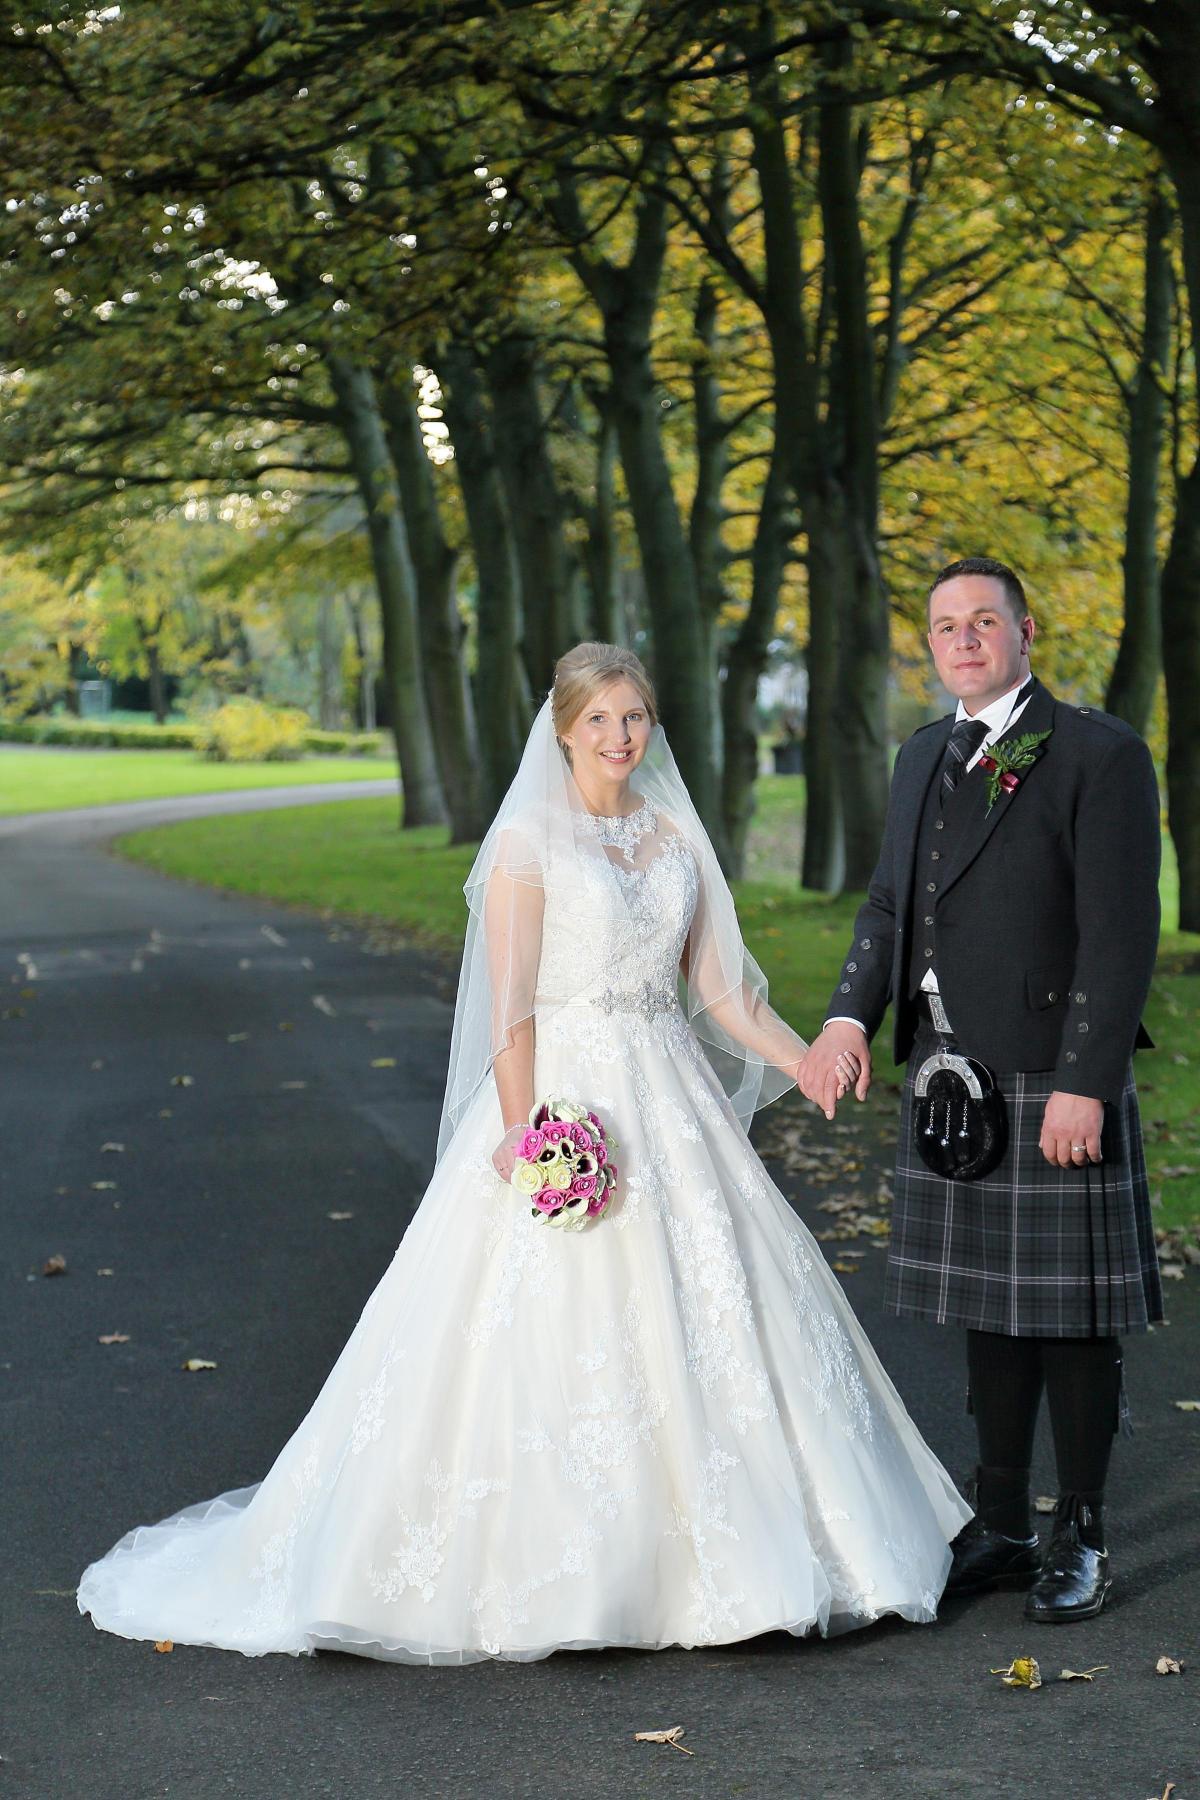 William Paterson formerly of Beith, married Fiona Forrest, formerly of Ayr, at Western House Hotel, Ayr 
Photo: Adore Wedding Photography